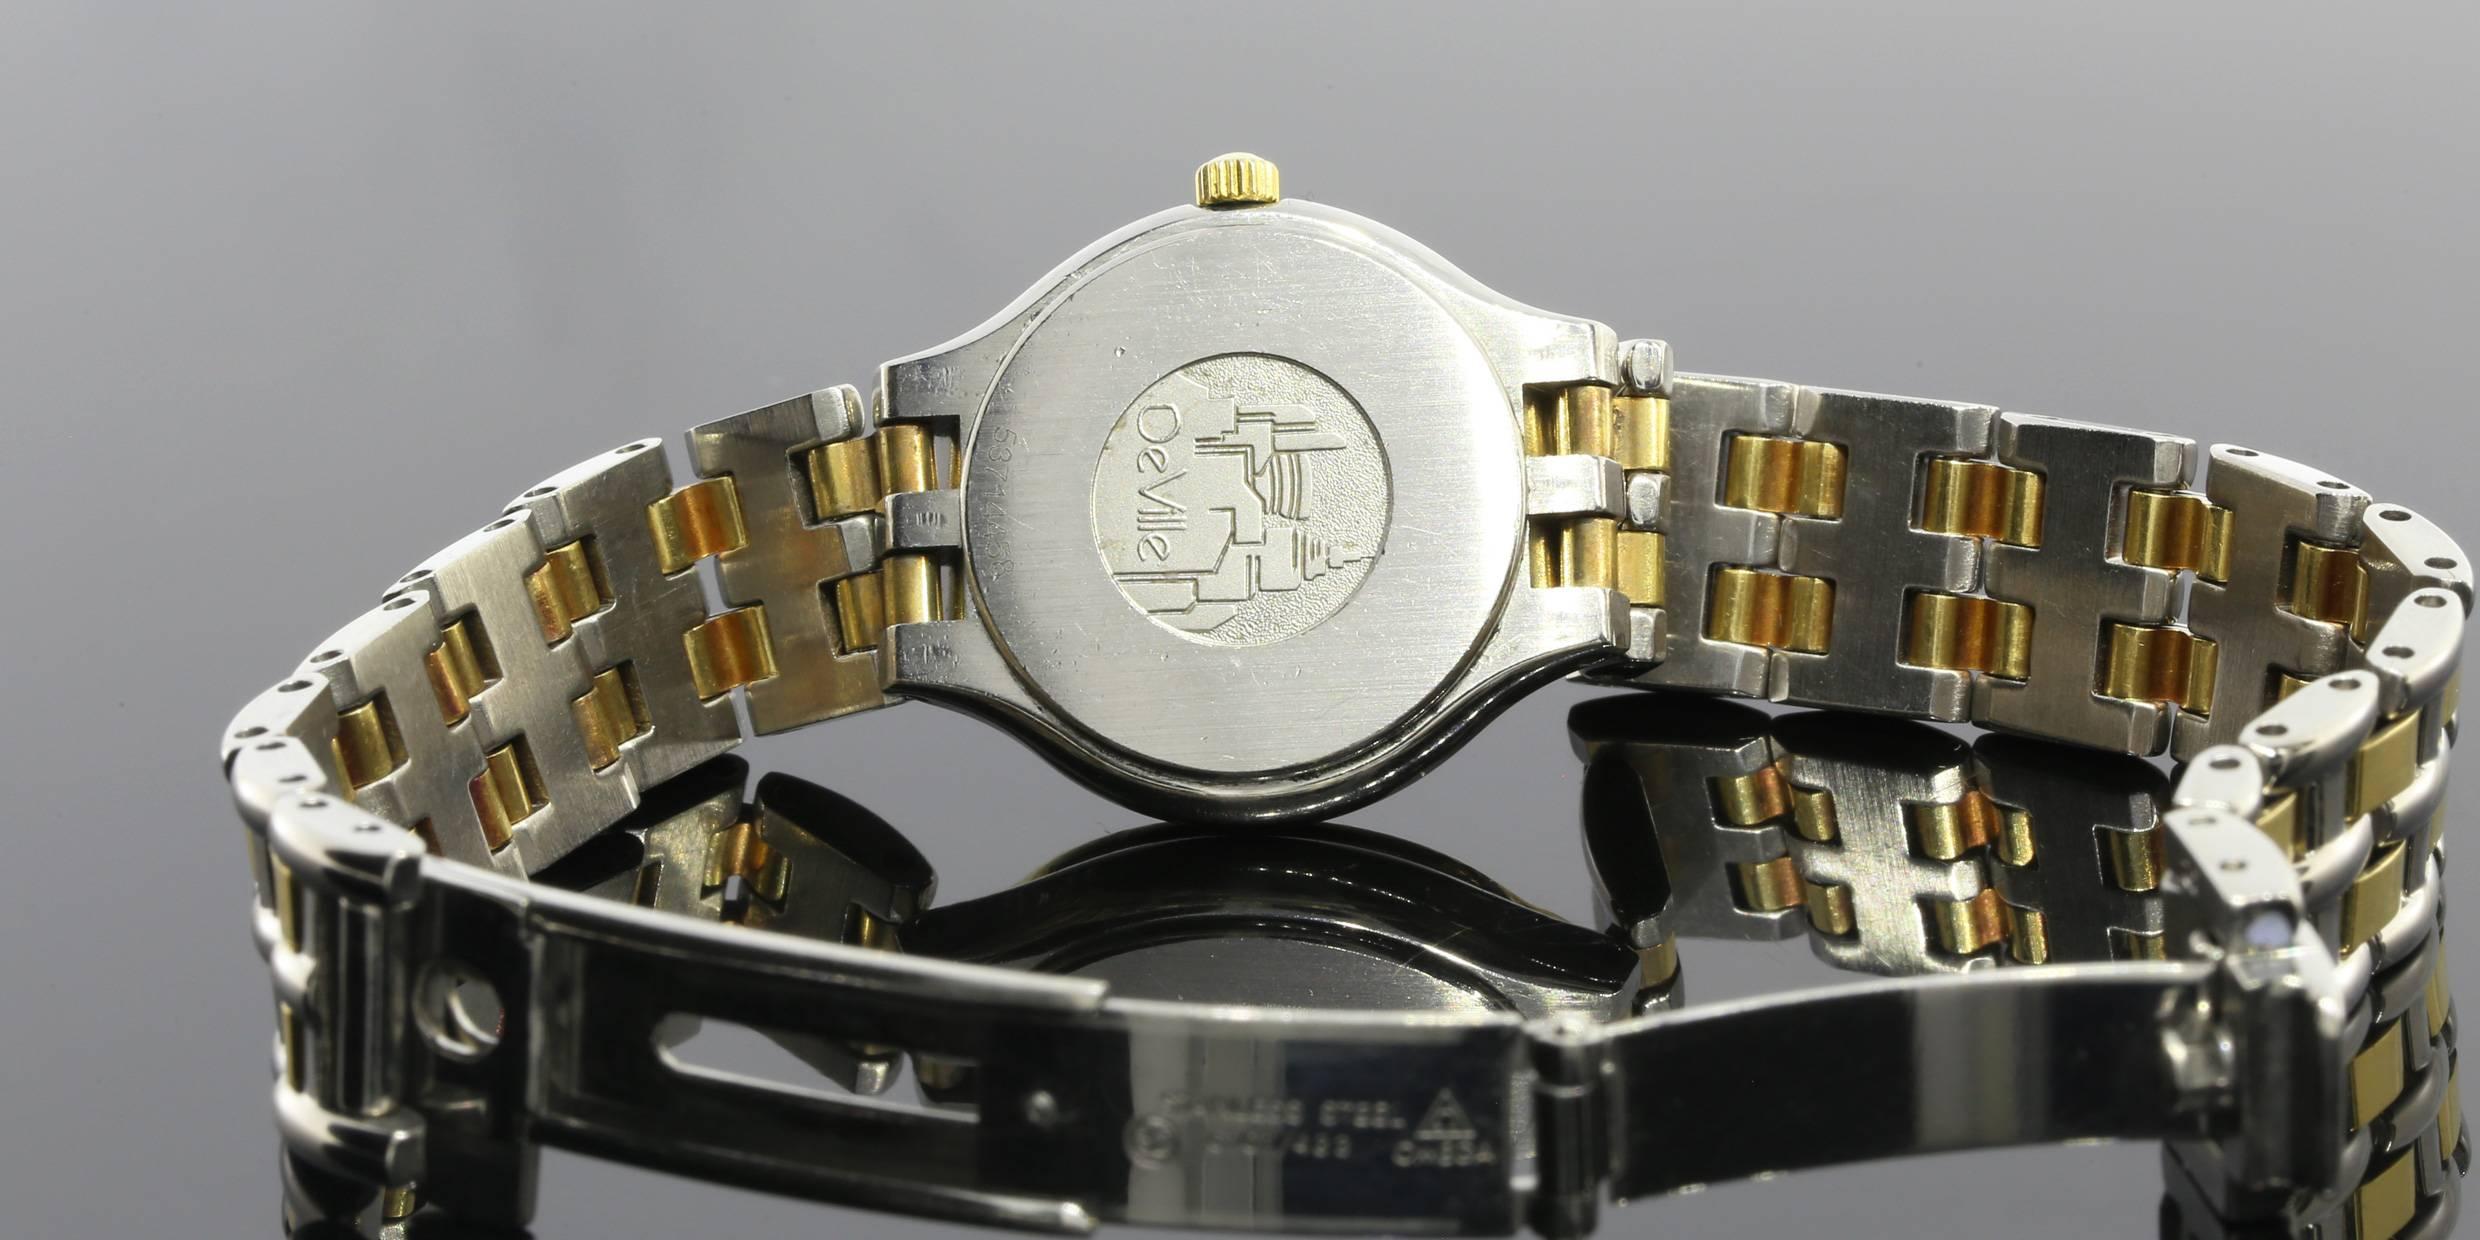 This is a beautiful stainless steel & 18 karat yellow gold Omega watch from the Deville collection. The 18 karat yellow gold bezel perfectly compliments the white dial of this elegant timepiece. This watch would be a perfect addition to any woman's